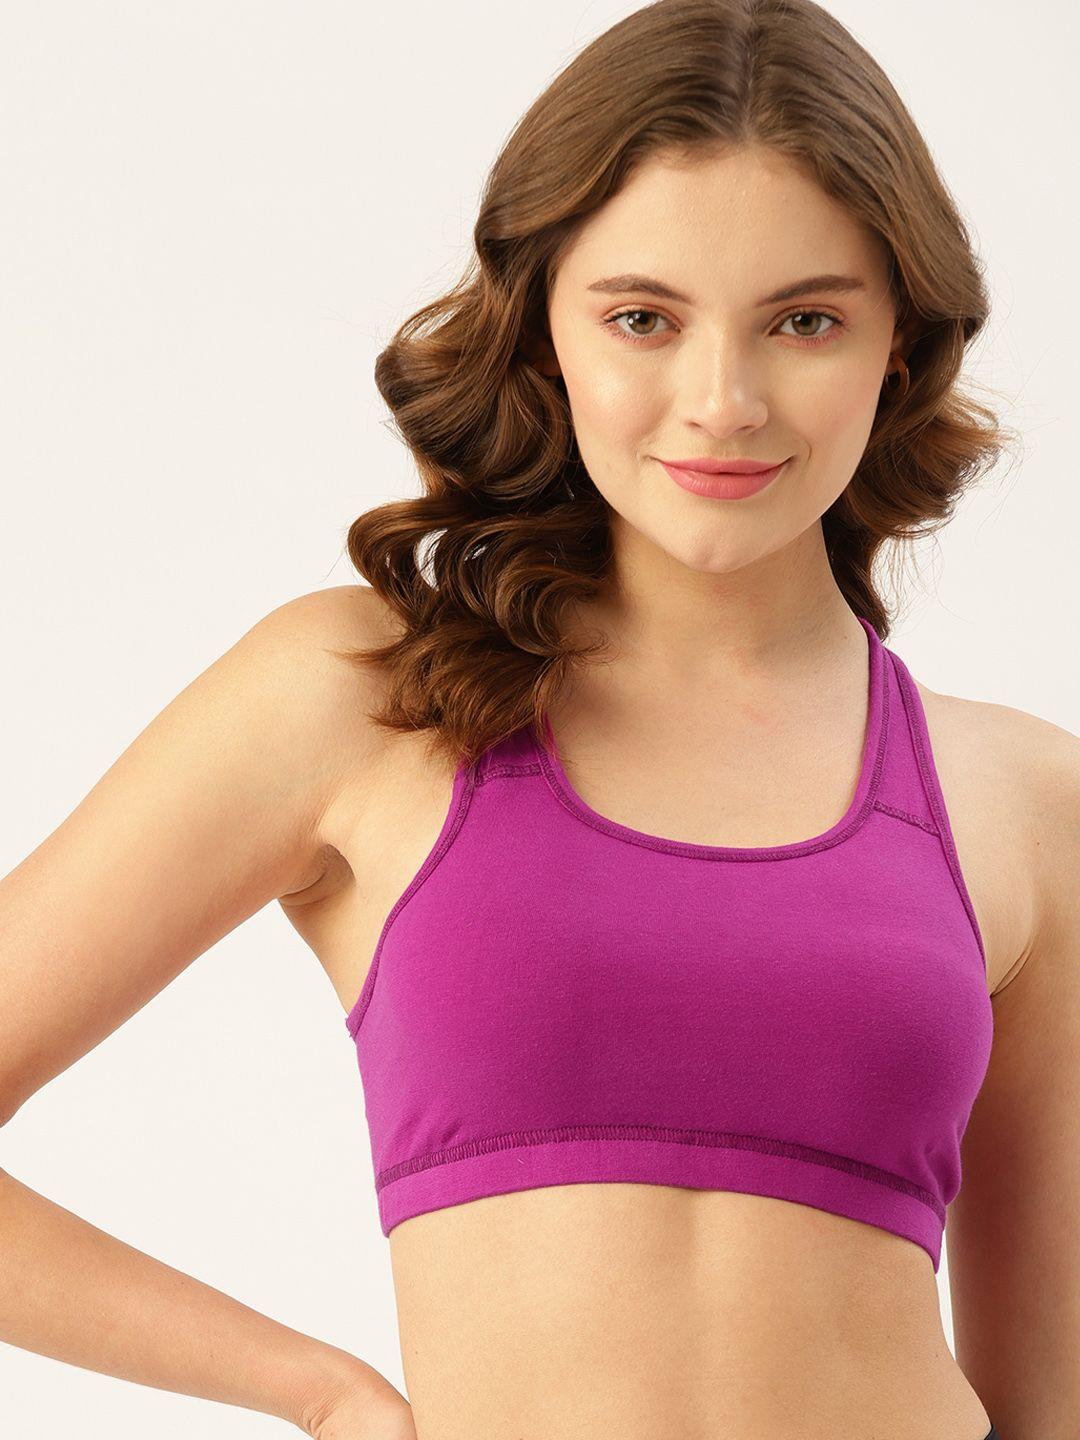 dressberry purple sports bra non-wired non-padded